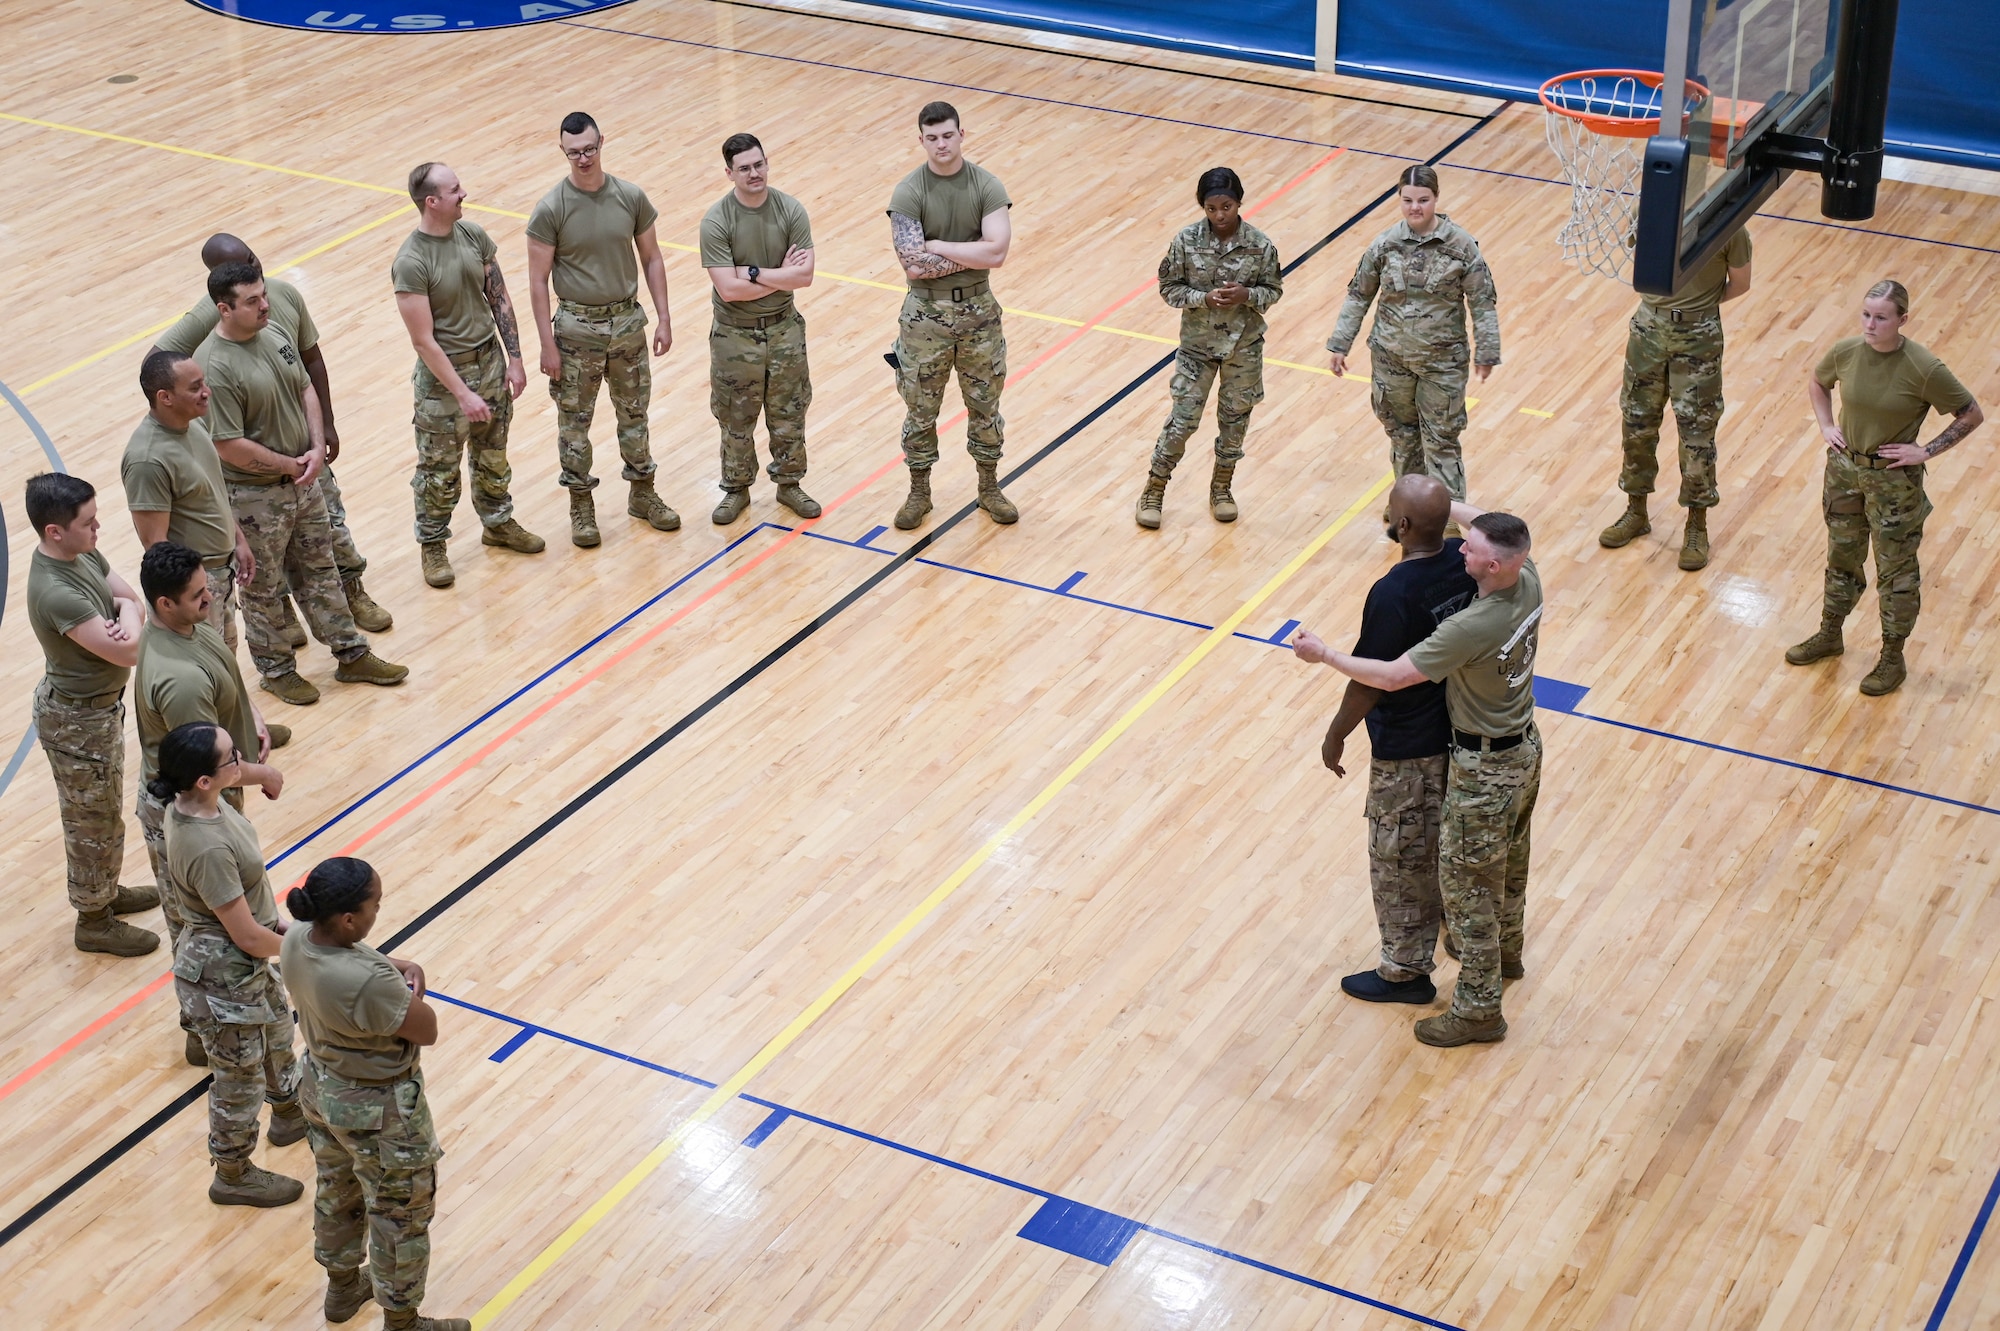 Airmen from the 23rd Security Forces Squadron circle around Bobby Cumby, a retired SFS defender and Office of Special Investigations agent, as he demonstrates how to escape a hold during the second iteration of Krav Maga training at Moody Air Force Base, Georgia, May 25, 2022. Krav Maga translates to “close combat,” and the guiding principle is self-protection while neutralizing the threat at hand. (U.S. Air Force photo by Senior Airman Rebeckah Medeiros)